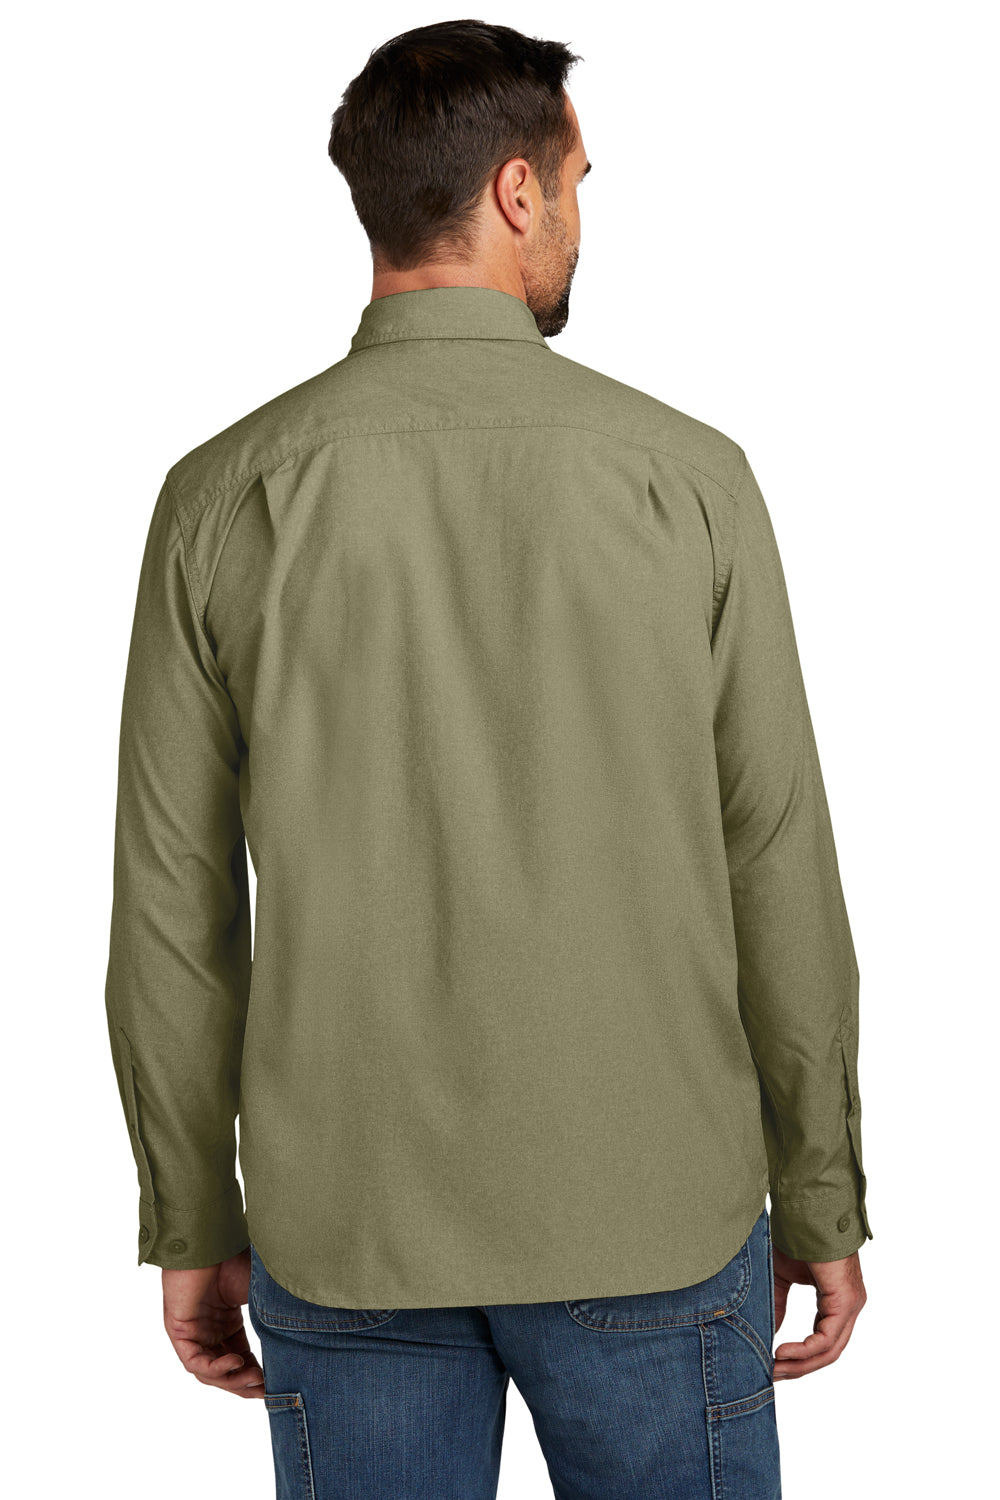 Carhartt CT105291 Mens Force Moisture Wicking Long Sleeve Button Down Shirt w/ Double Pockets Burnt Olive Green Model Back